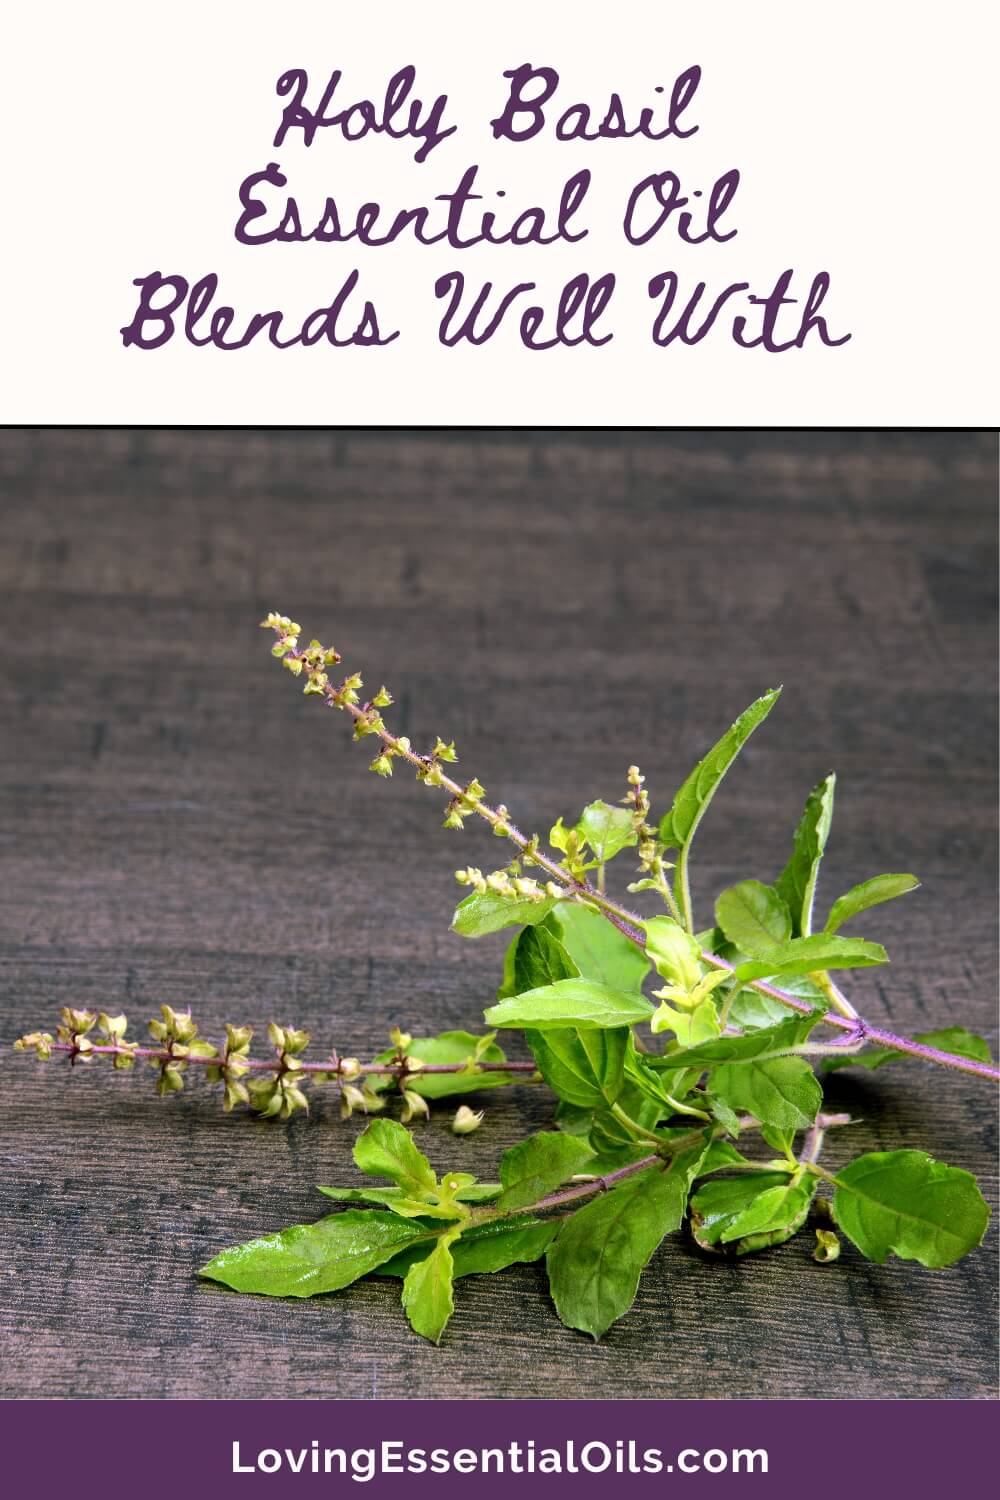 Holy Basil Essential Oil Blends Well With by Loving Essential Oils